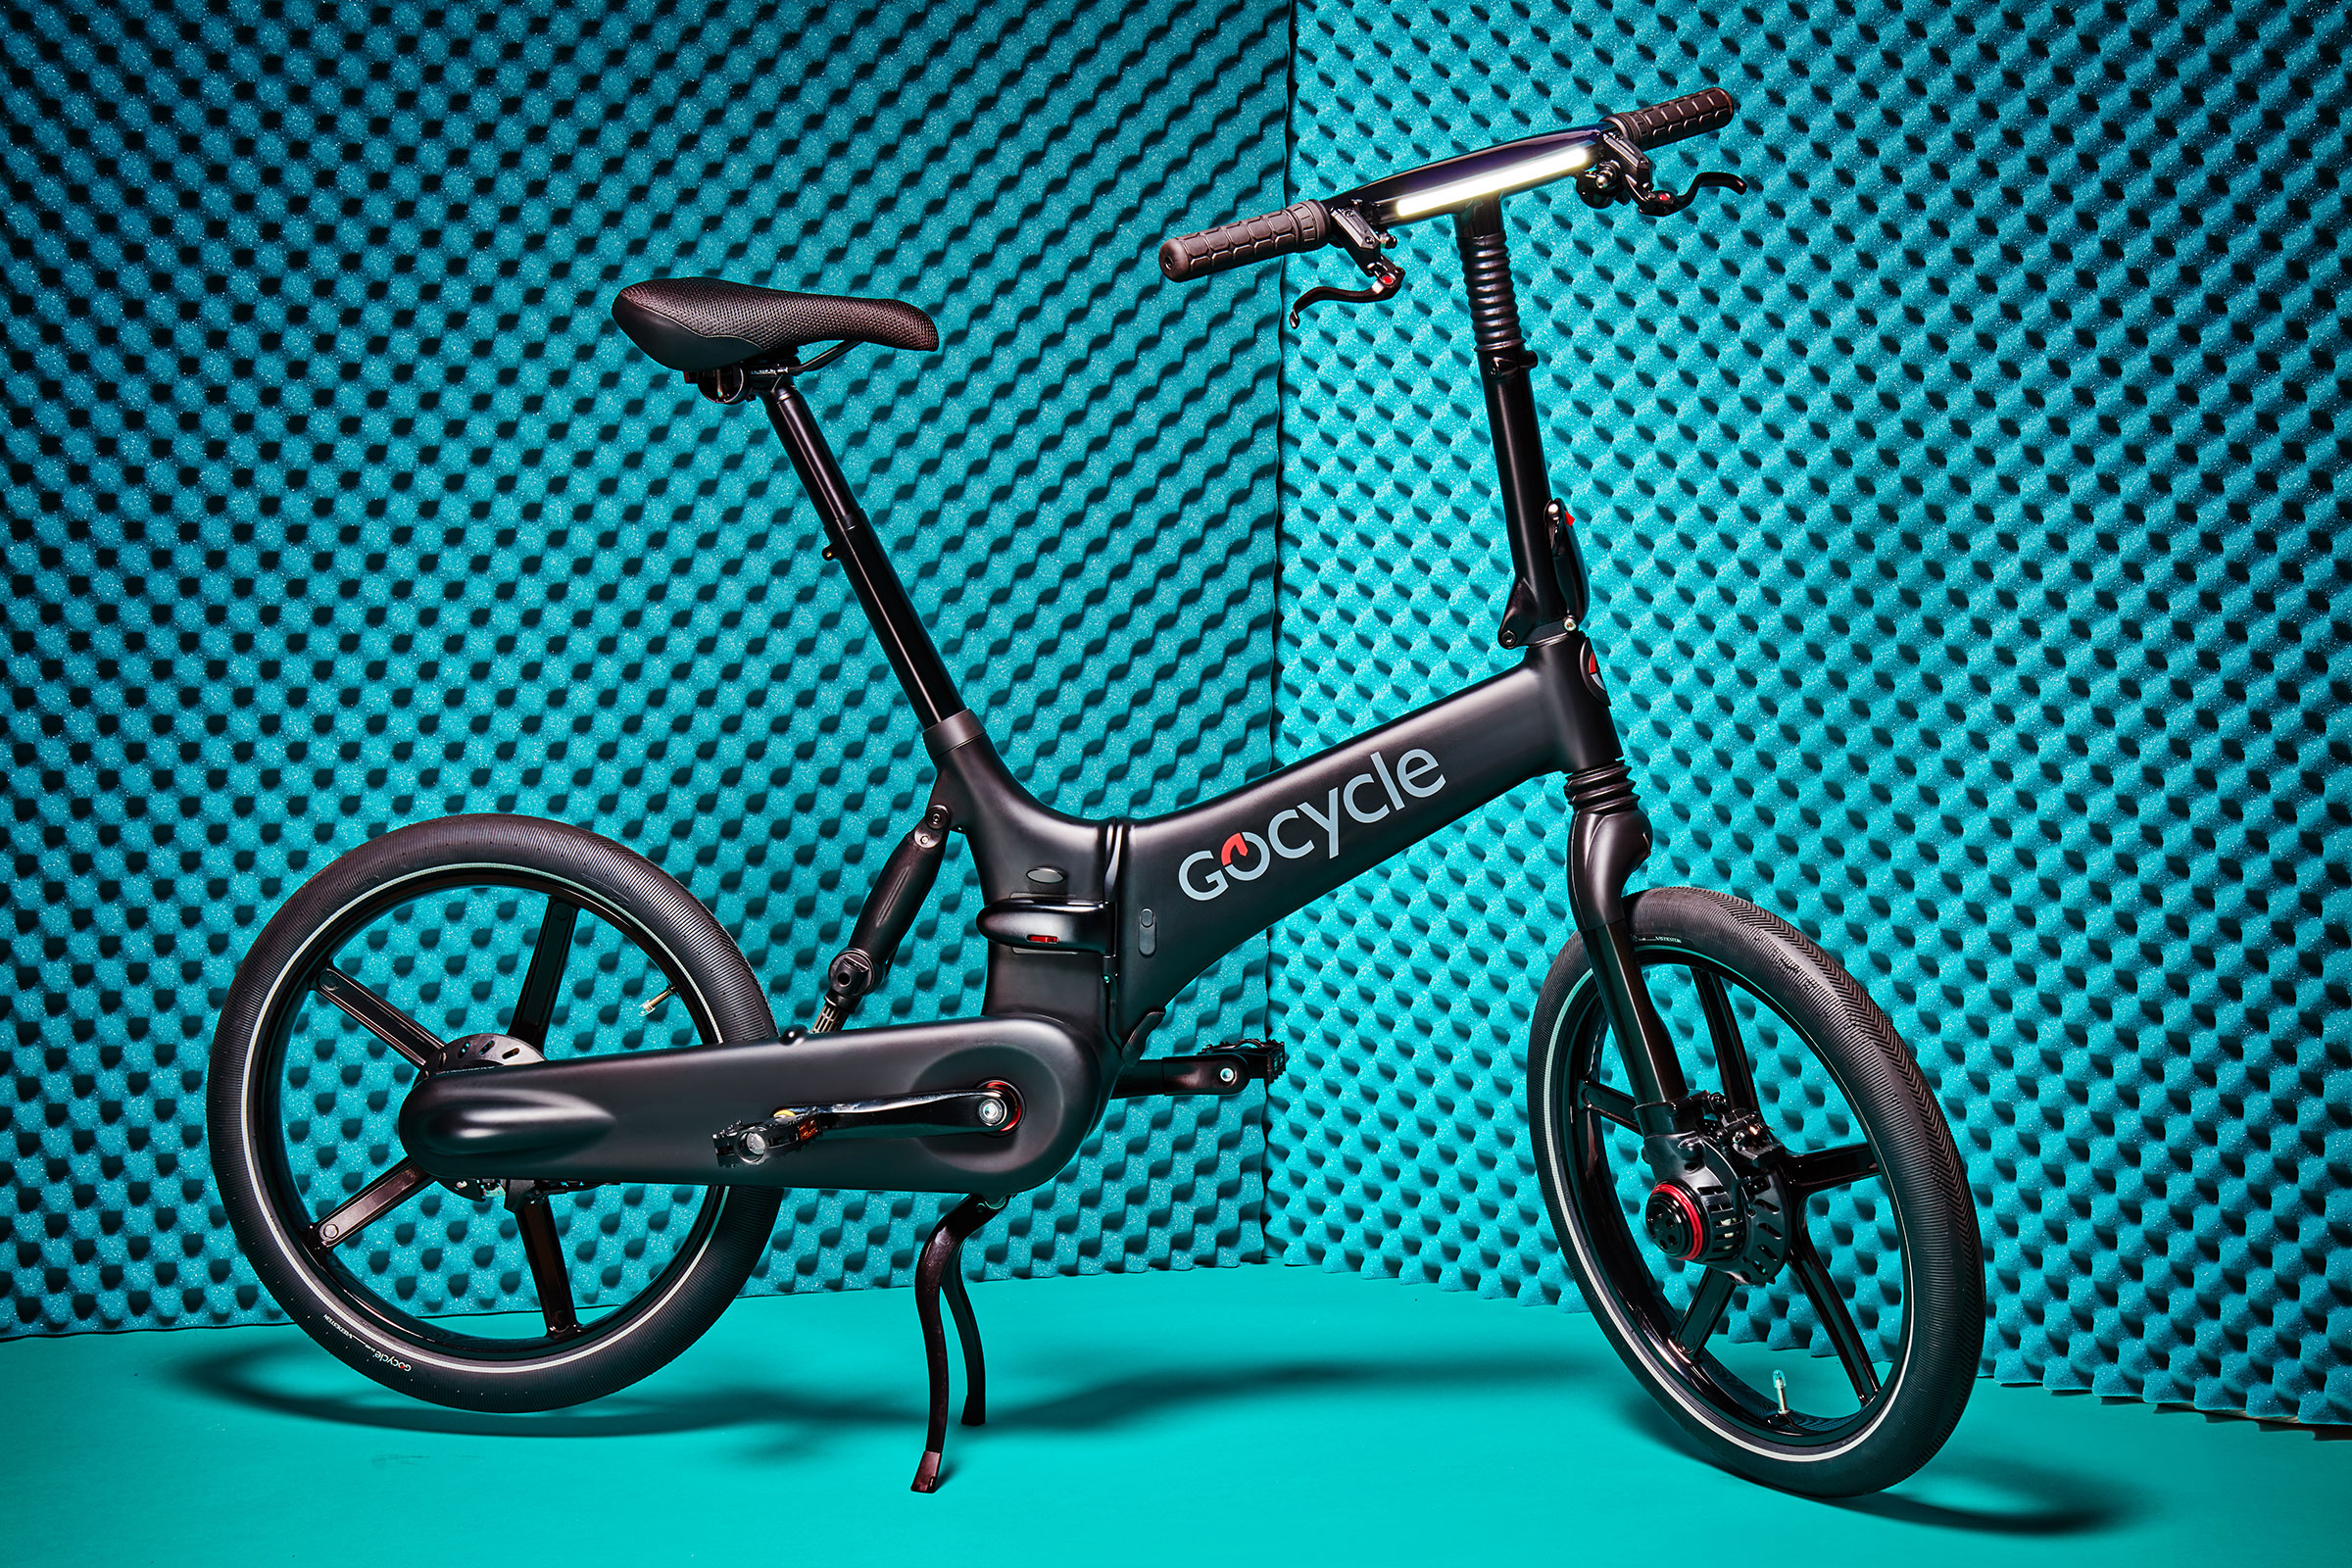 Best Inventions 2020: Gocycle GXi